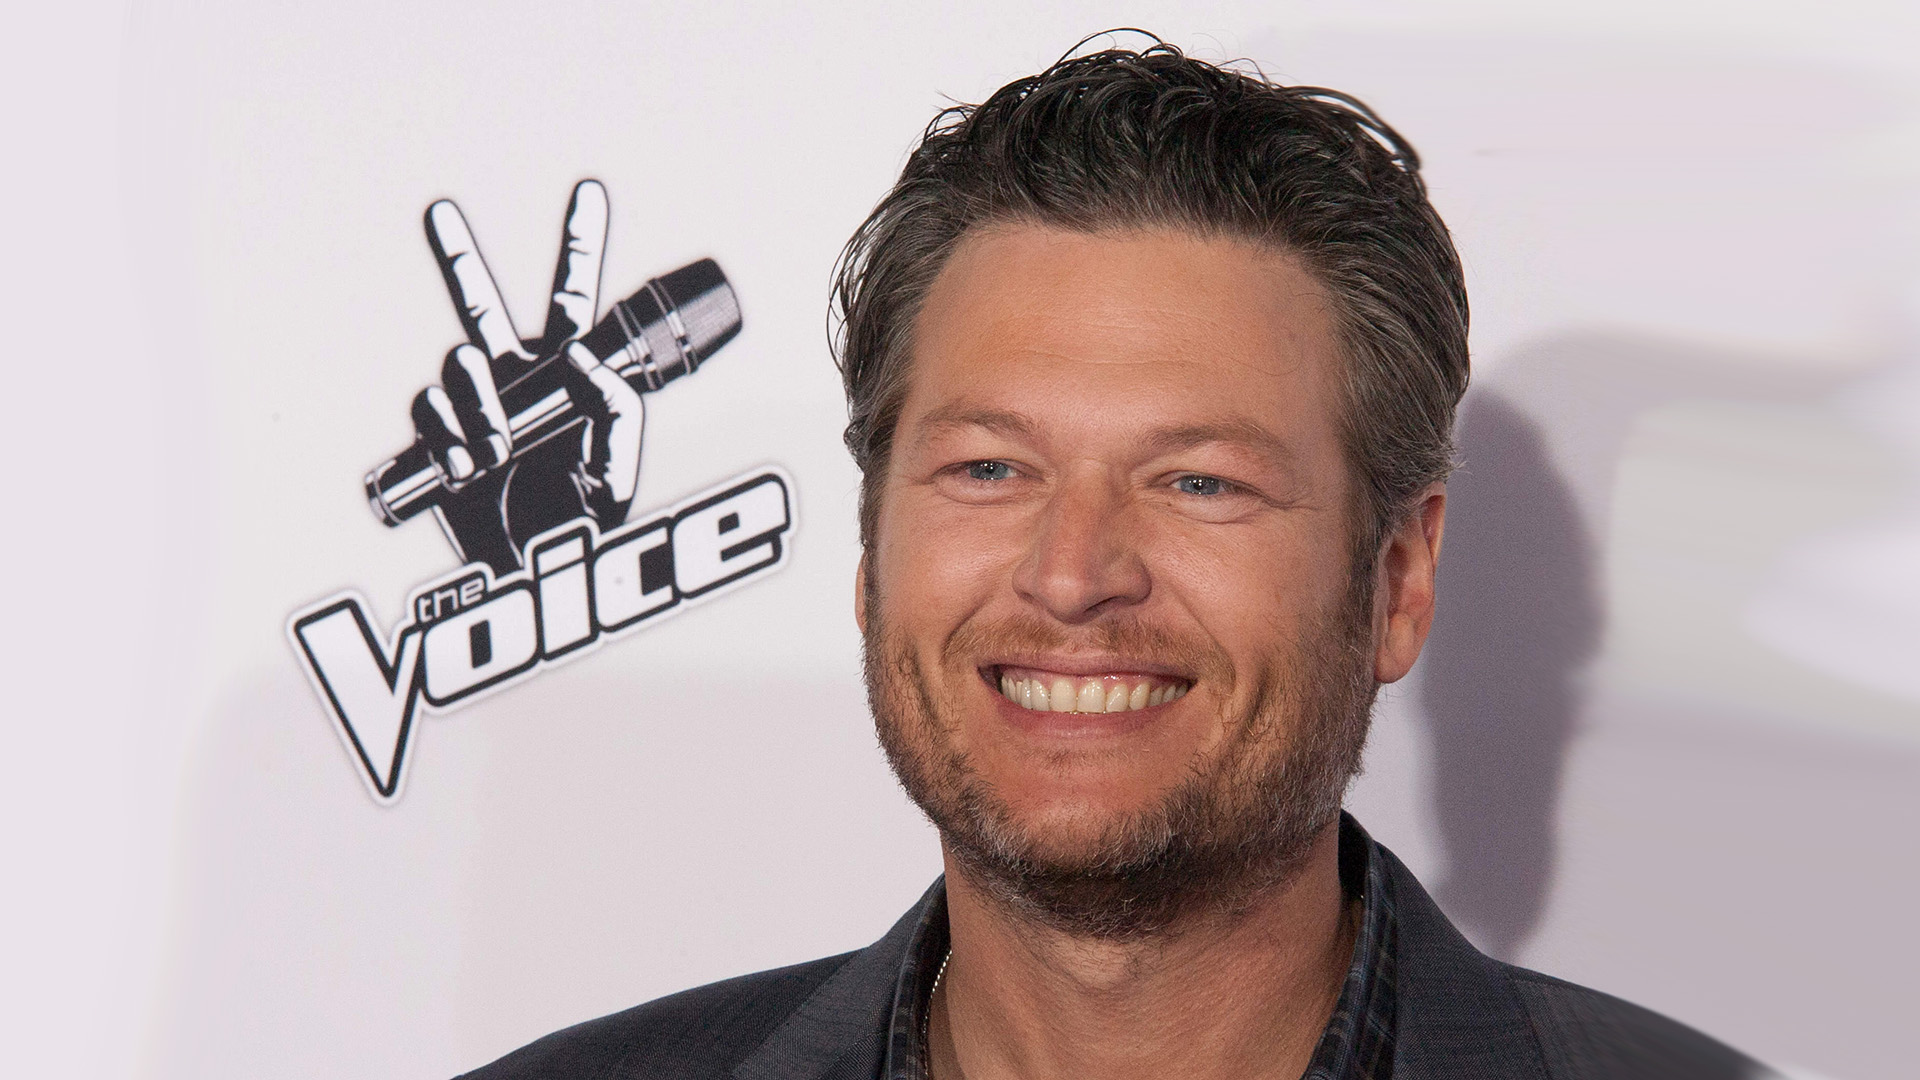 Blake Shelton's Exit Takes Over The Voice: Fans Fed Up With Excessive Promos